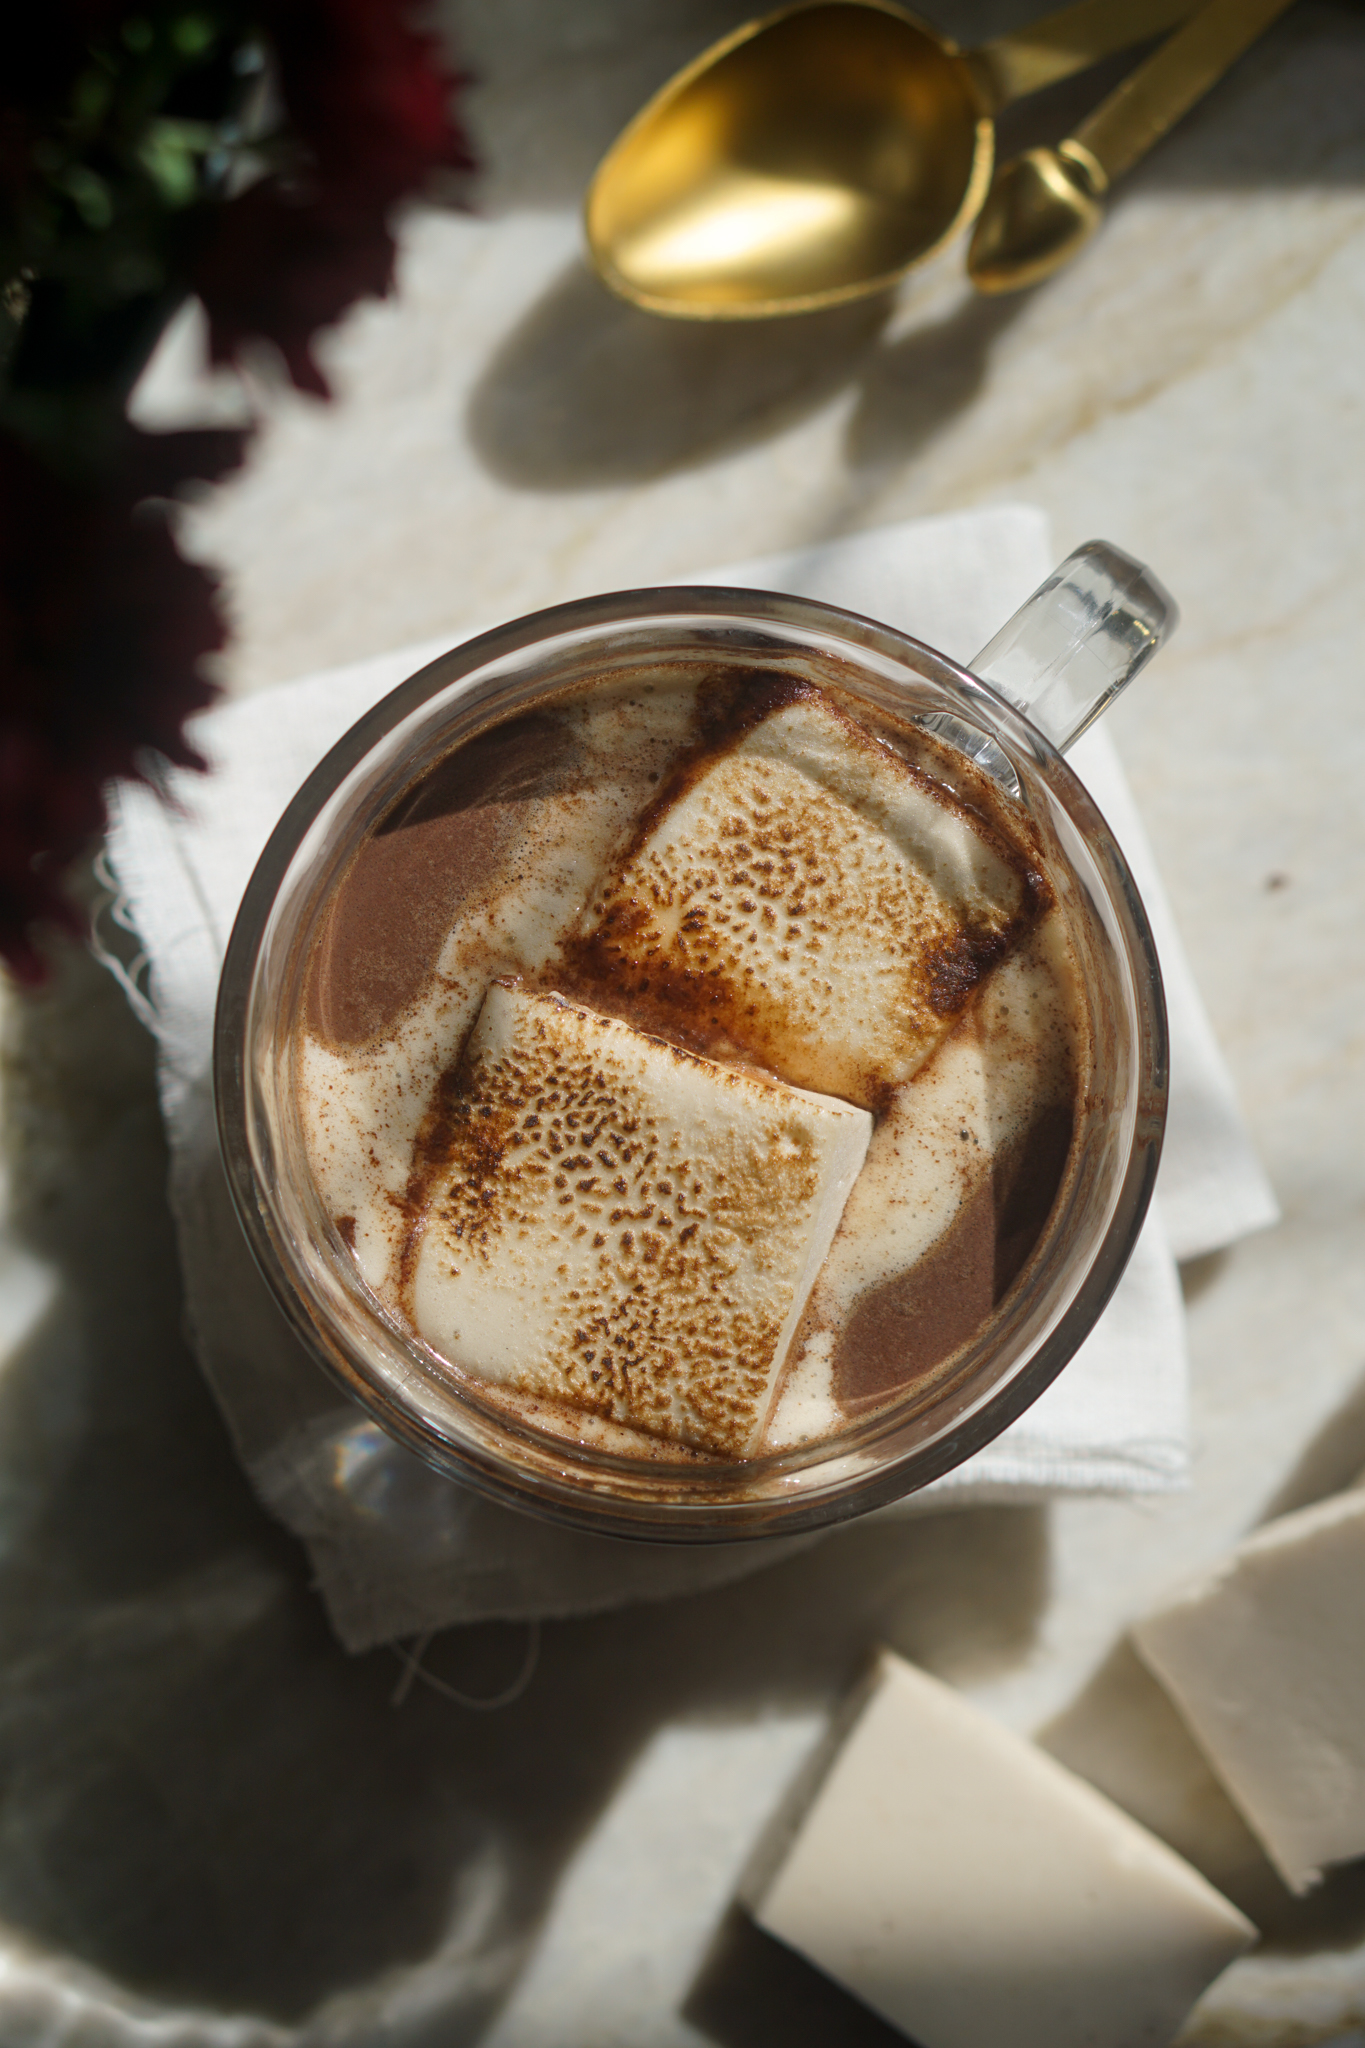 The BEST hot chocolate with homemade marshmallows